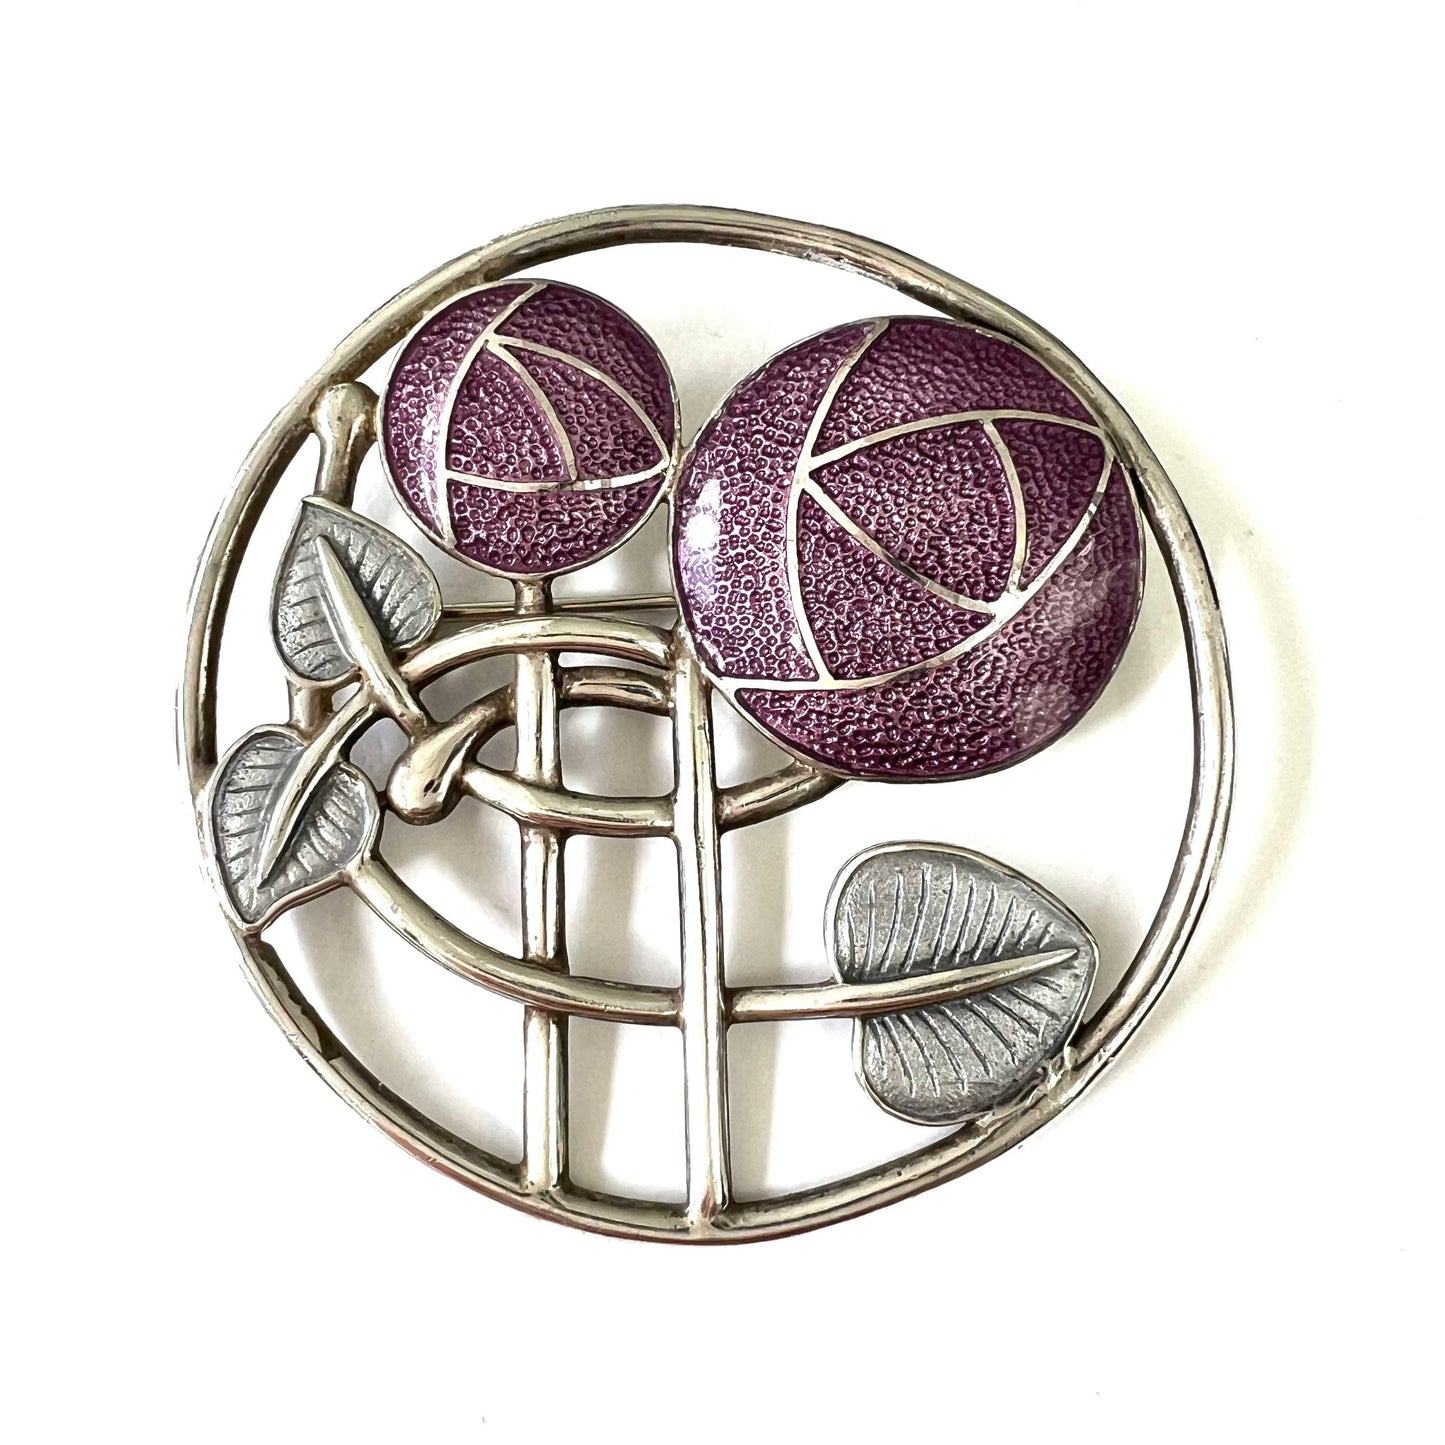 Fish Enterprises 925 Silver Mackintosh Inspired Silver and Purple Enamelled Open Work Brooch (from the year 2000)